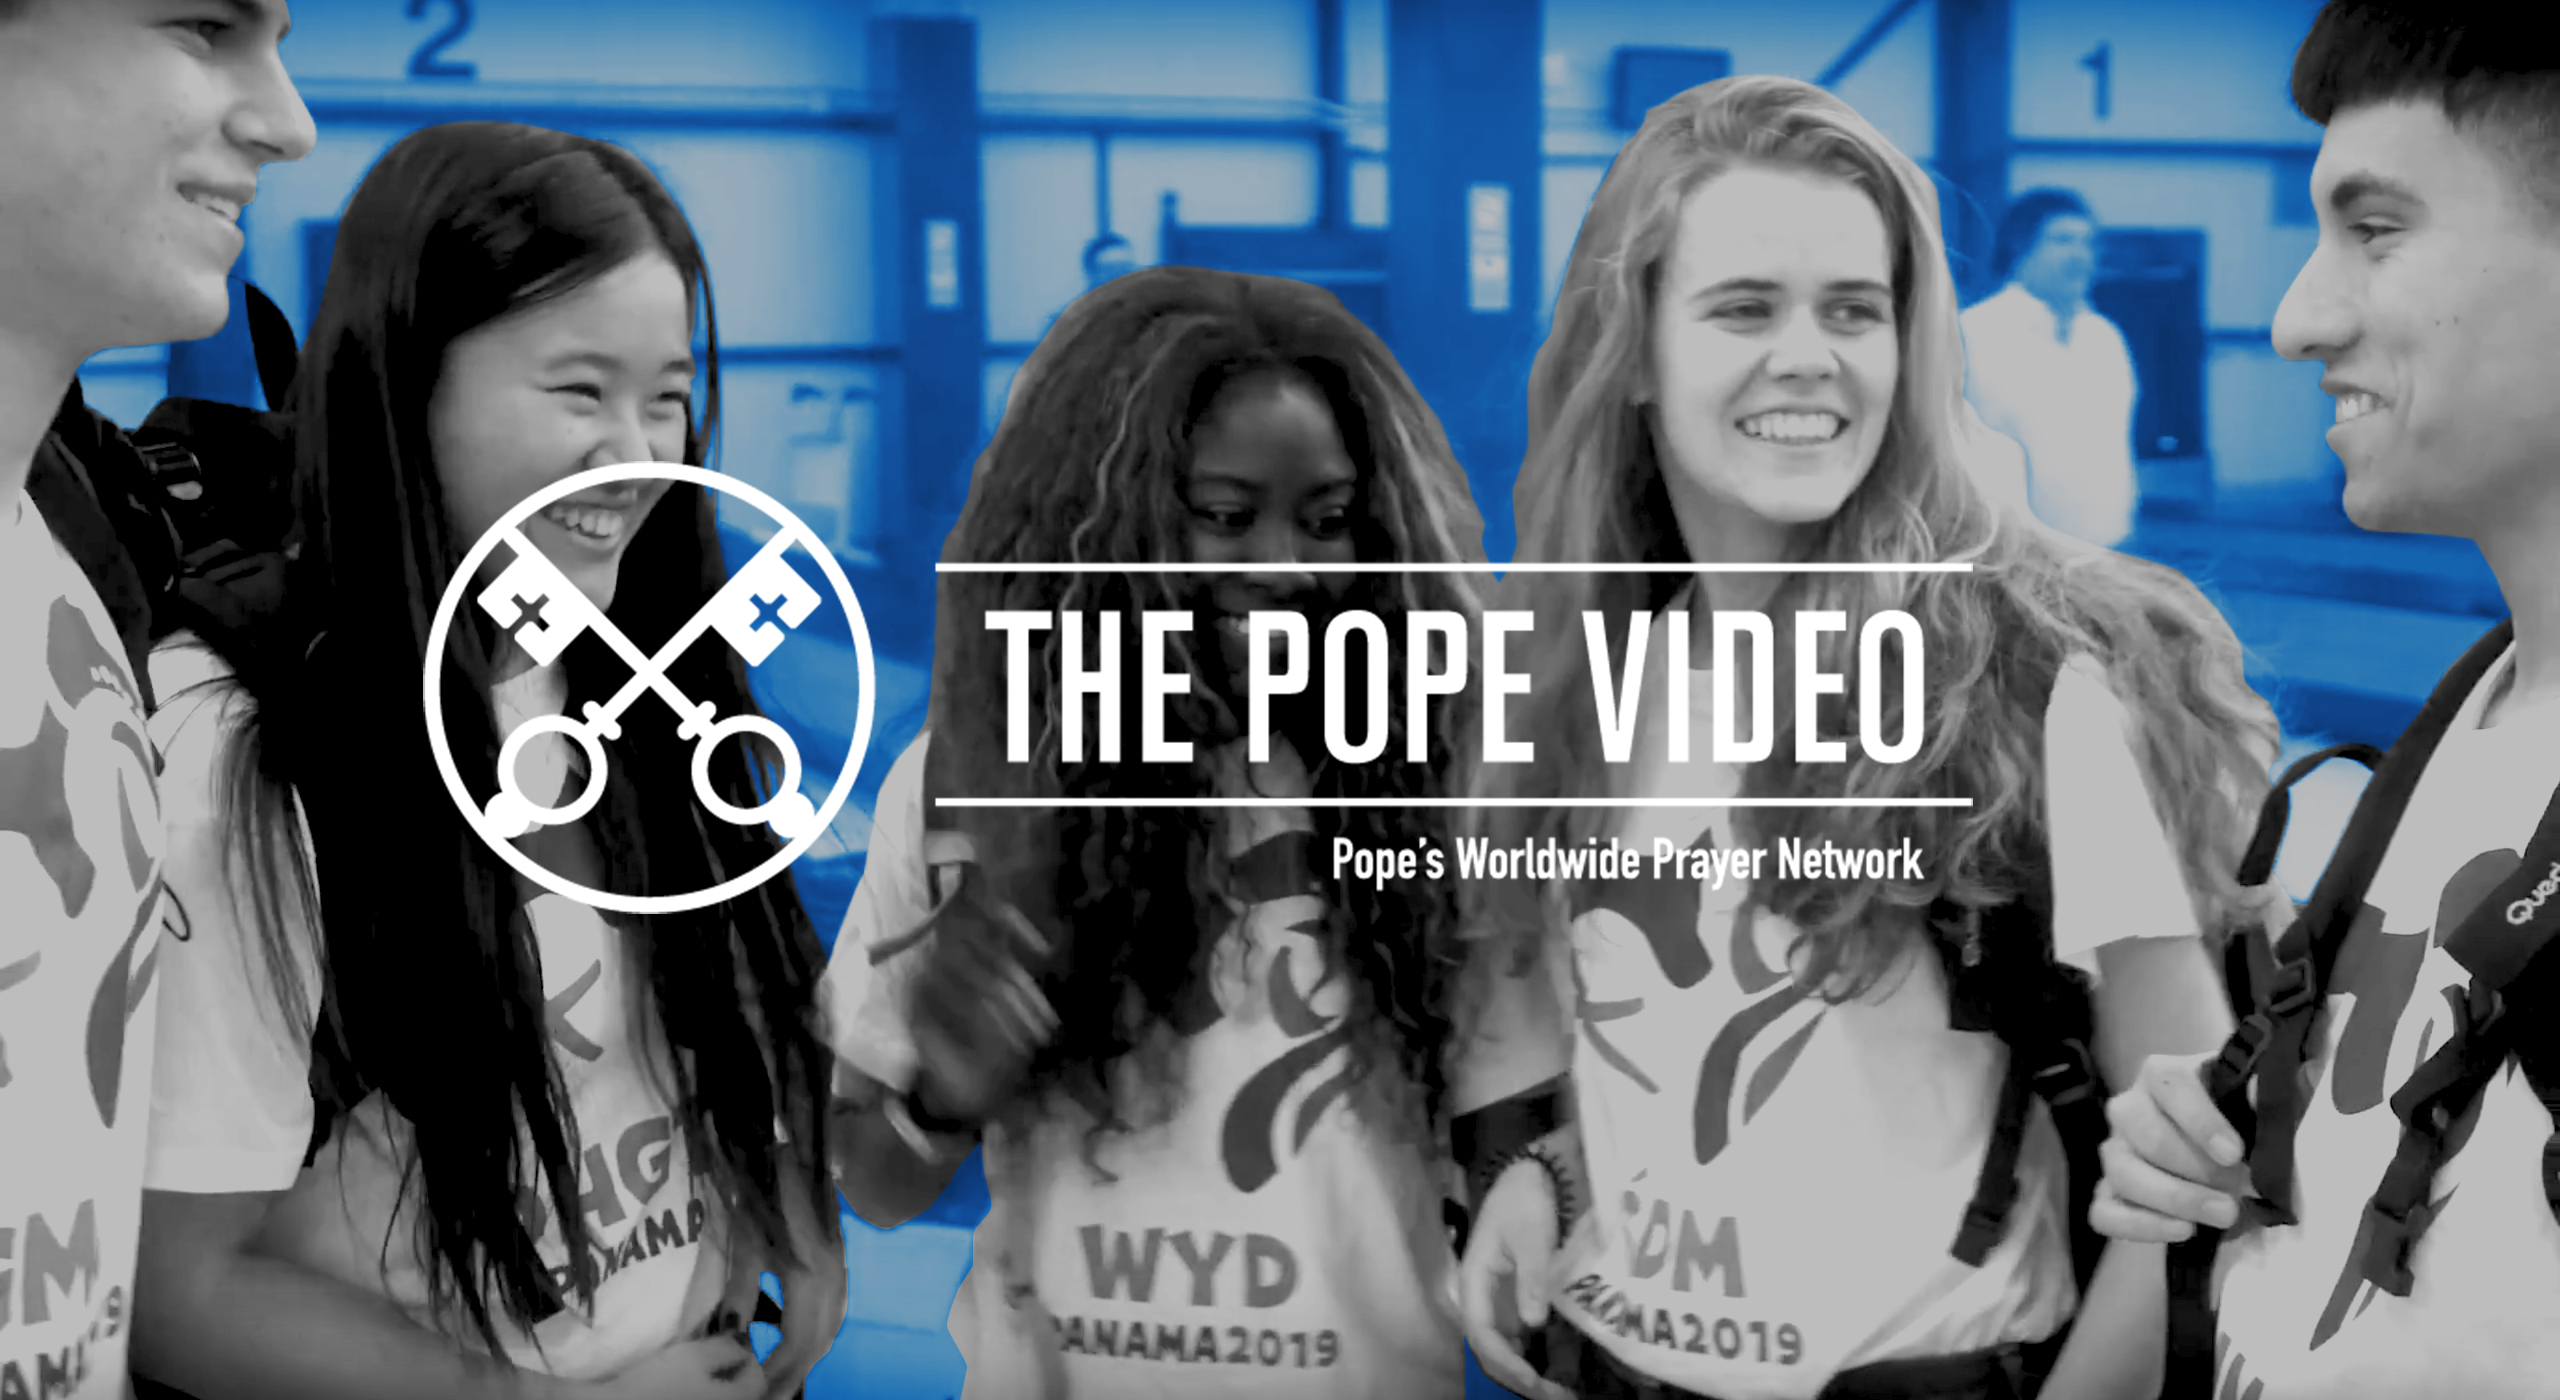 The Pope Video January 2019 (Official Image)